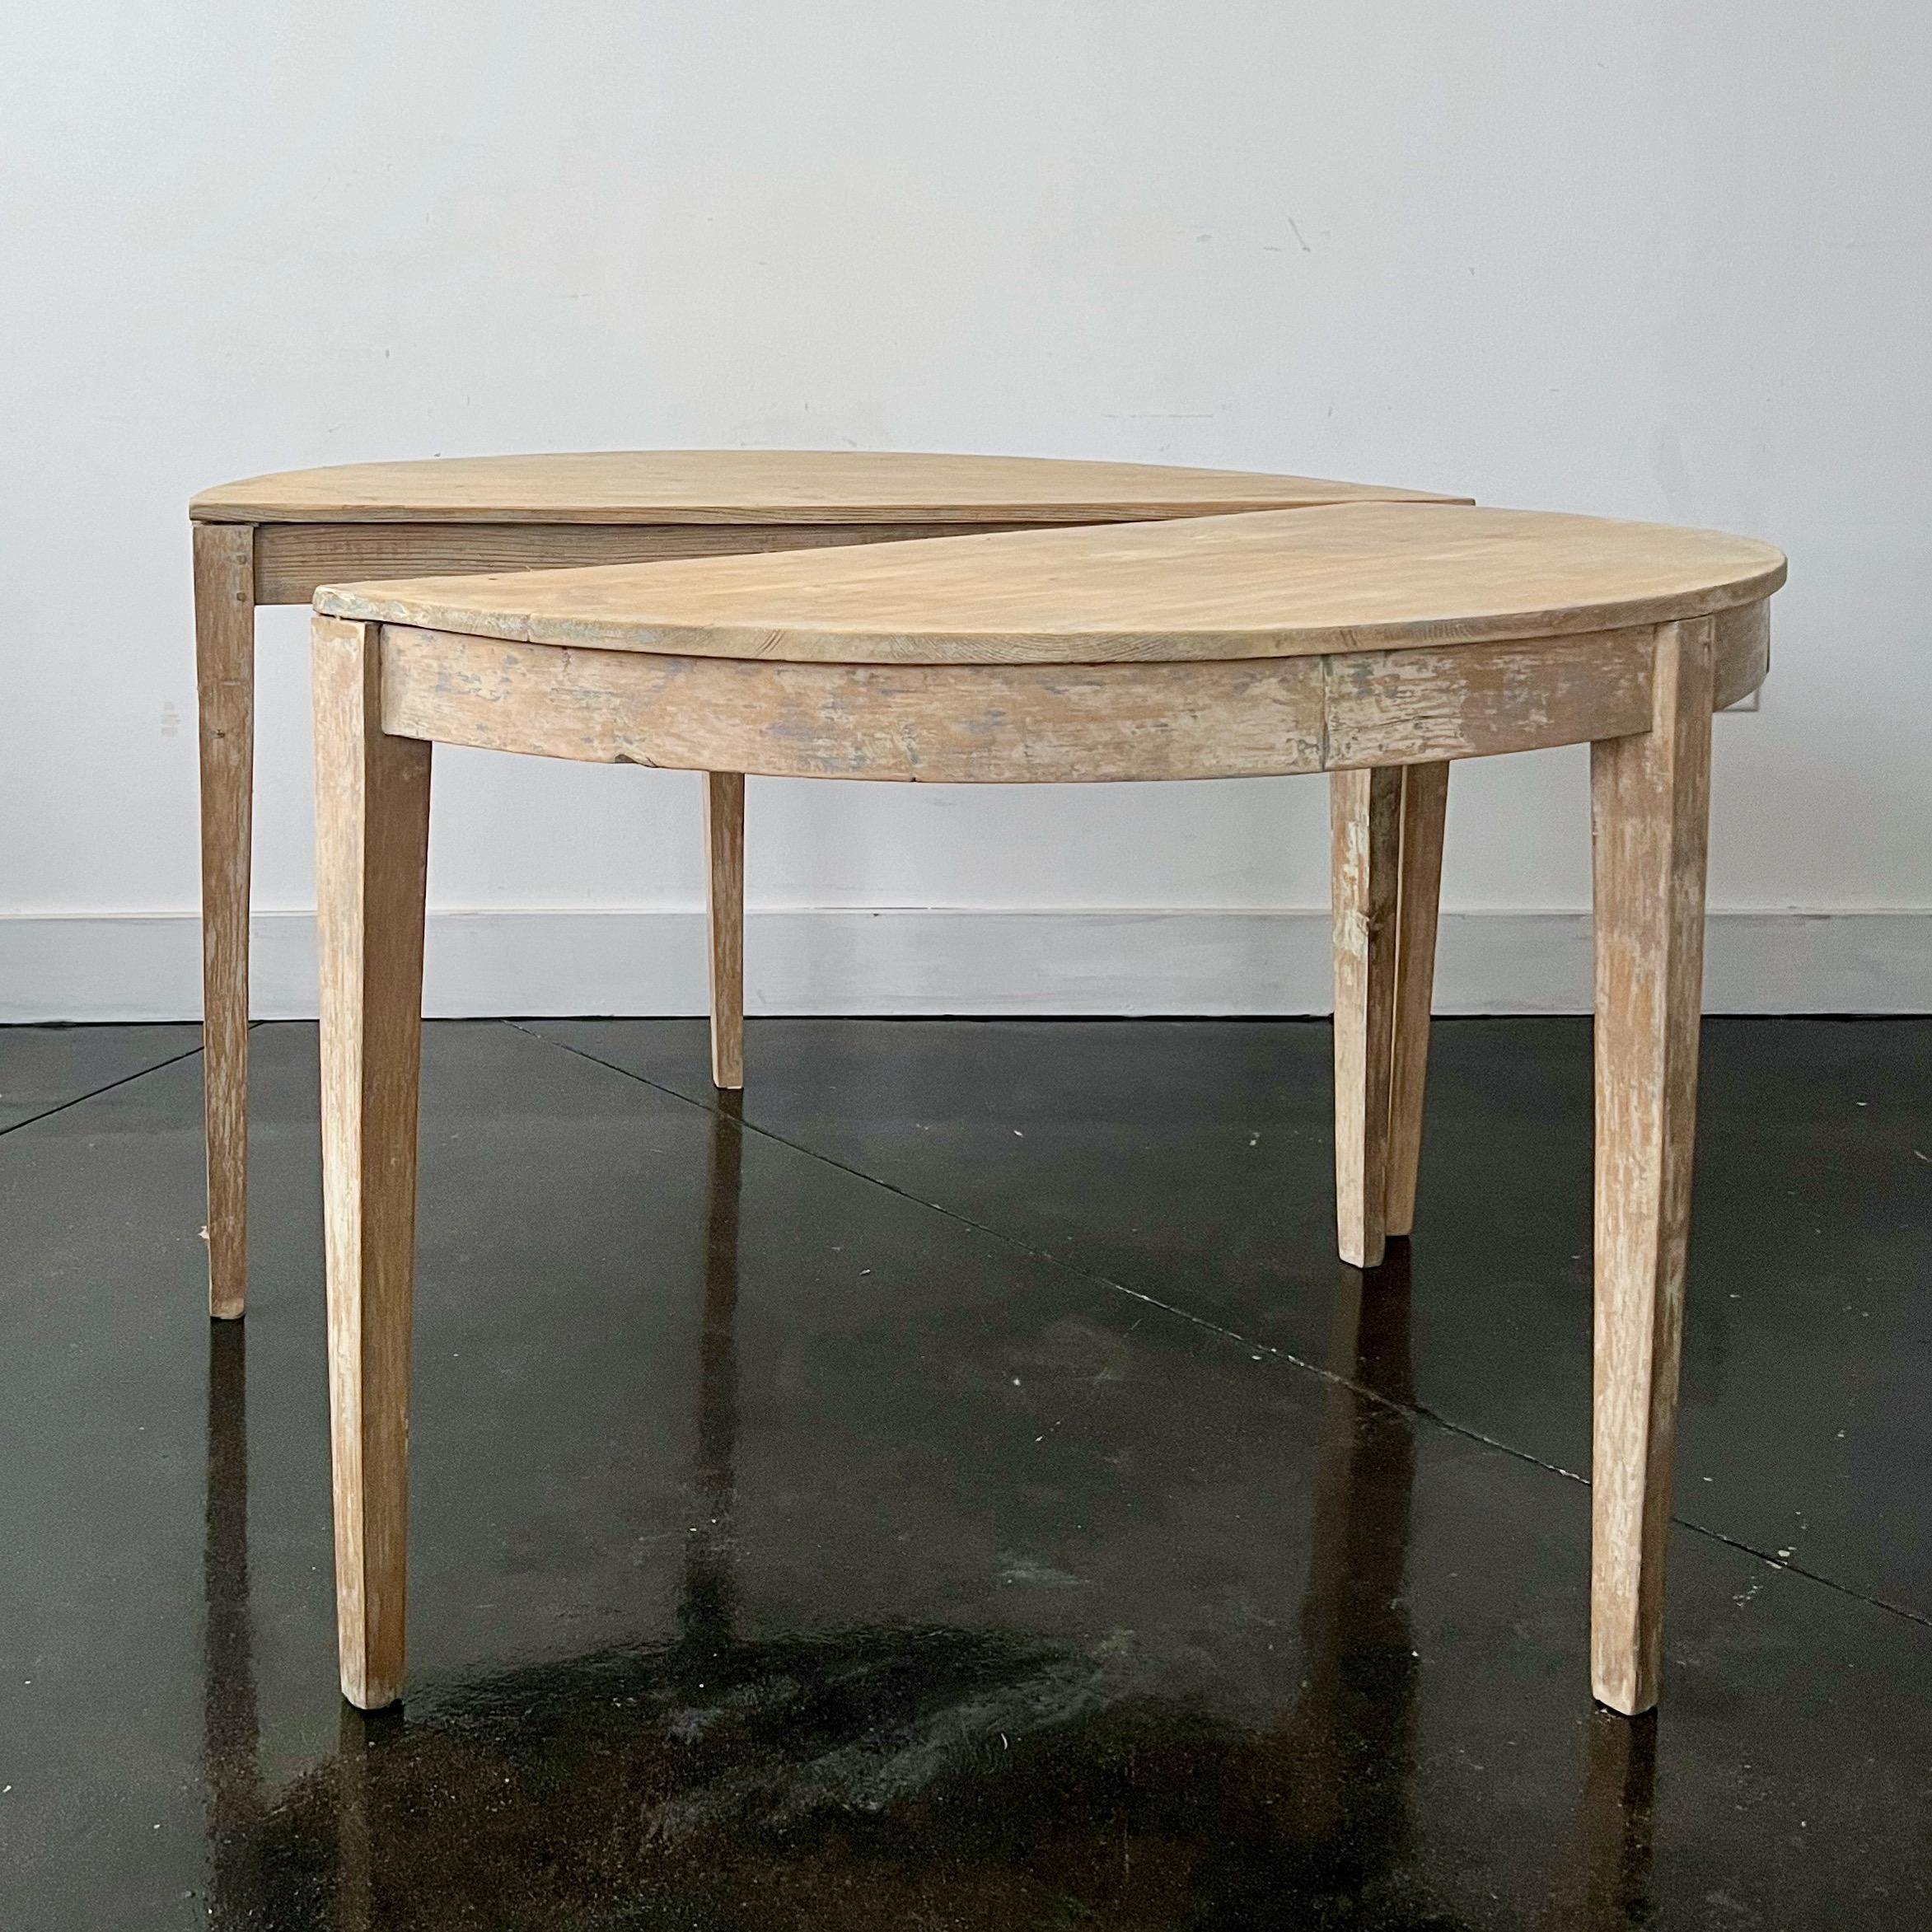 Pair of 19th century Swedish demi-lune consoles dry scraped several layers of old paint to its most original finish.
Half-moon shape top supported by long slender tapered legs.
Tables are free standing for separate use or putting them together as